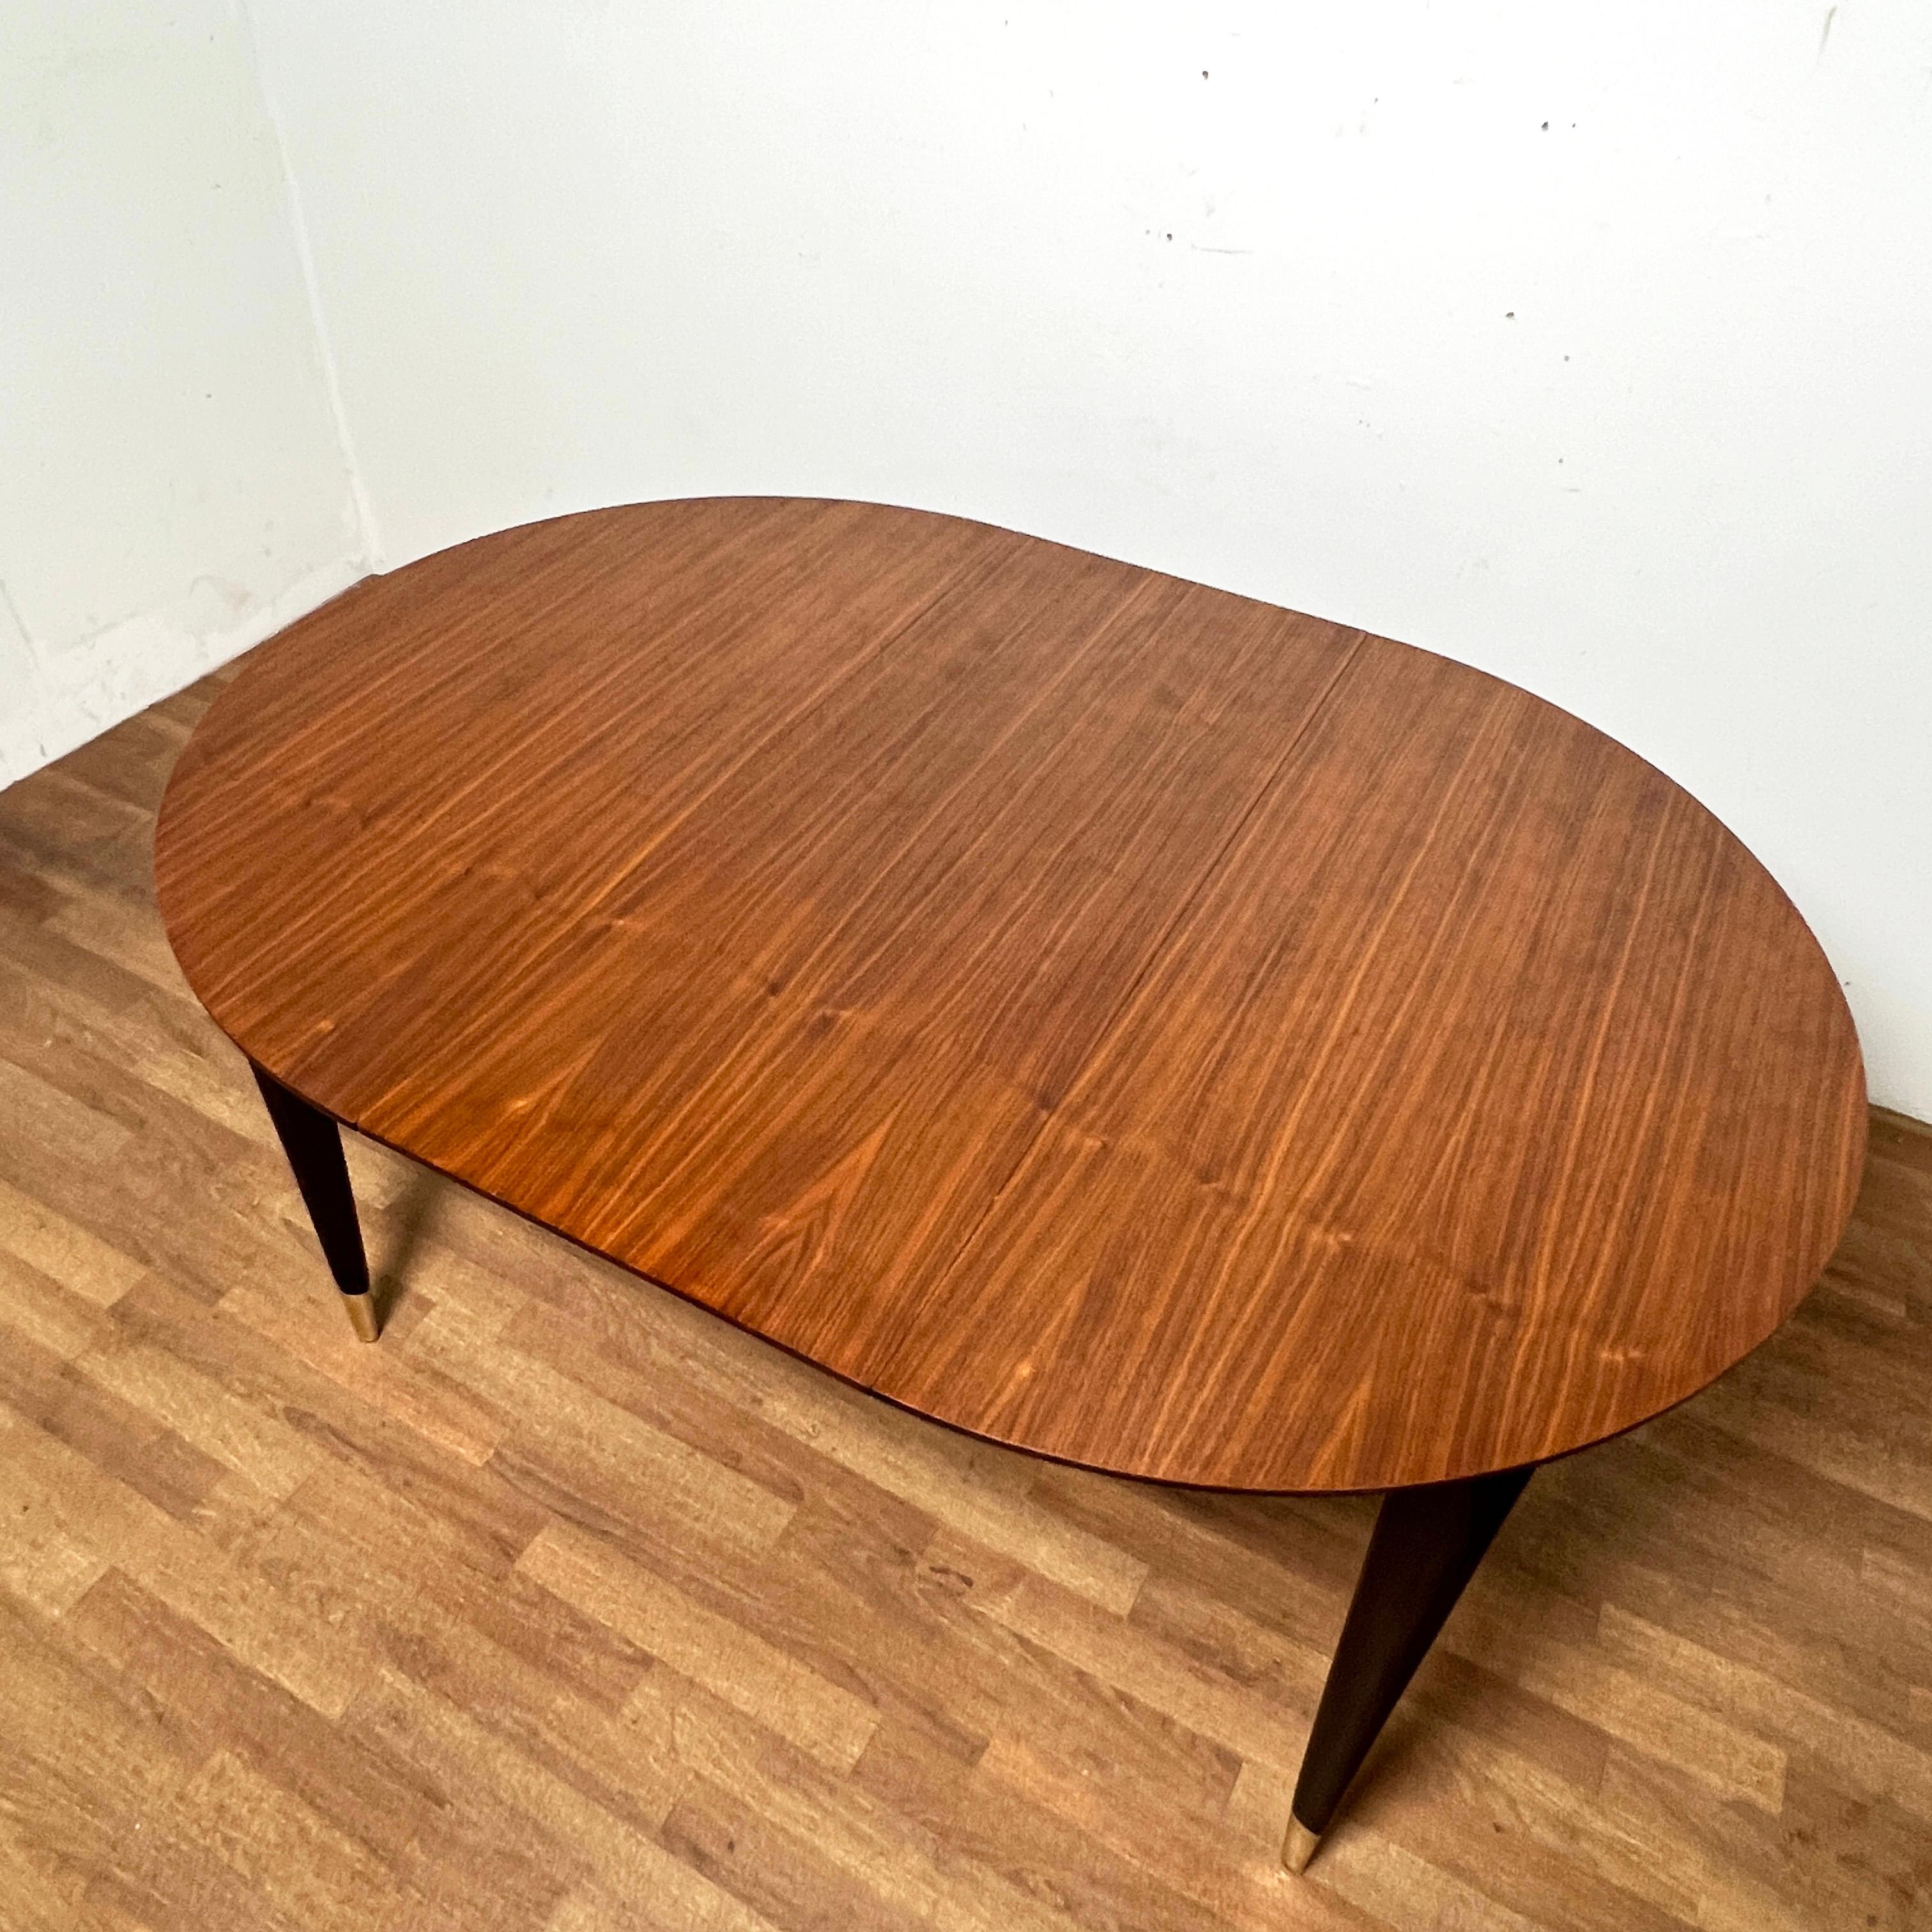 Mid-20th Century Gio Ponti for Singer Dining Table in Walnut With Brass Sabots Circa 1950s For Sale